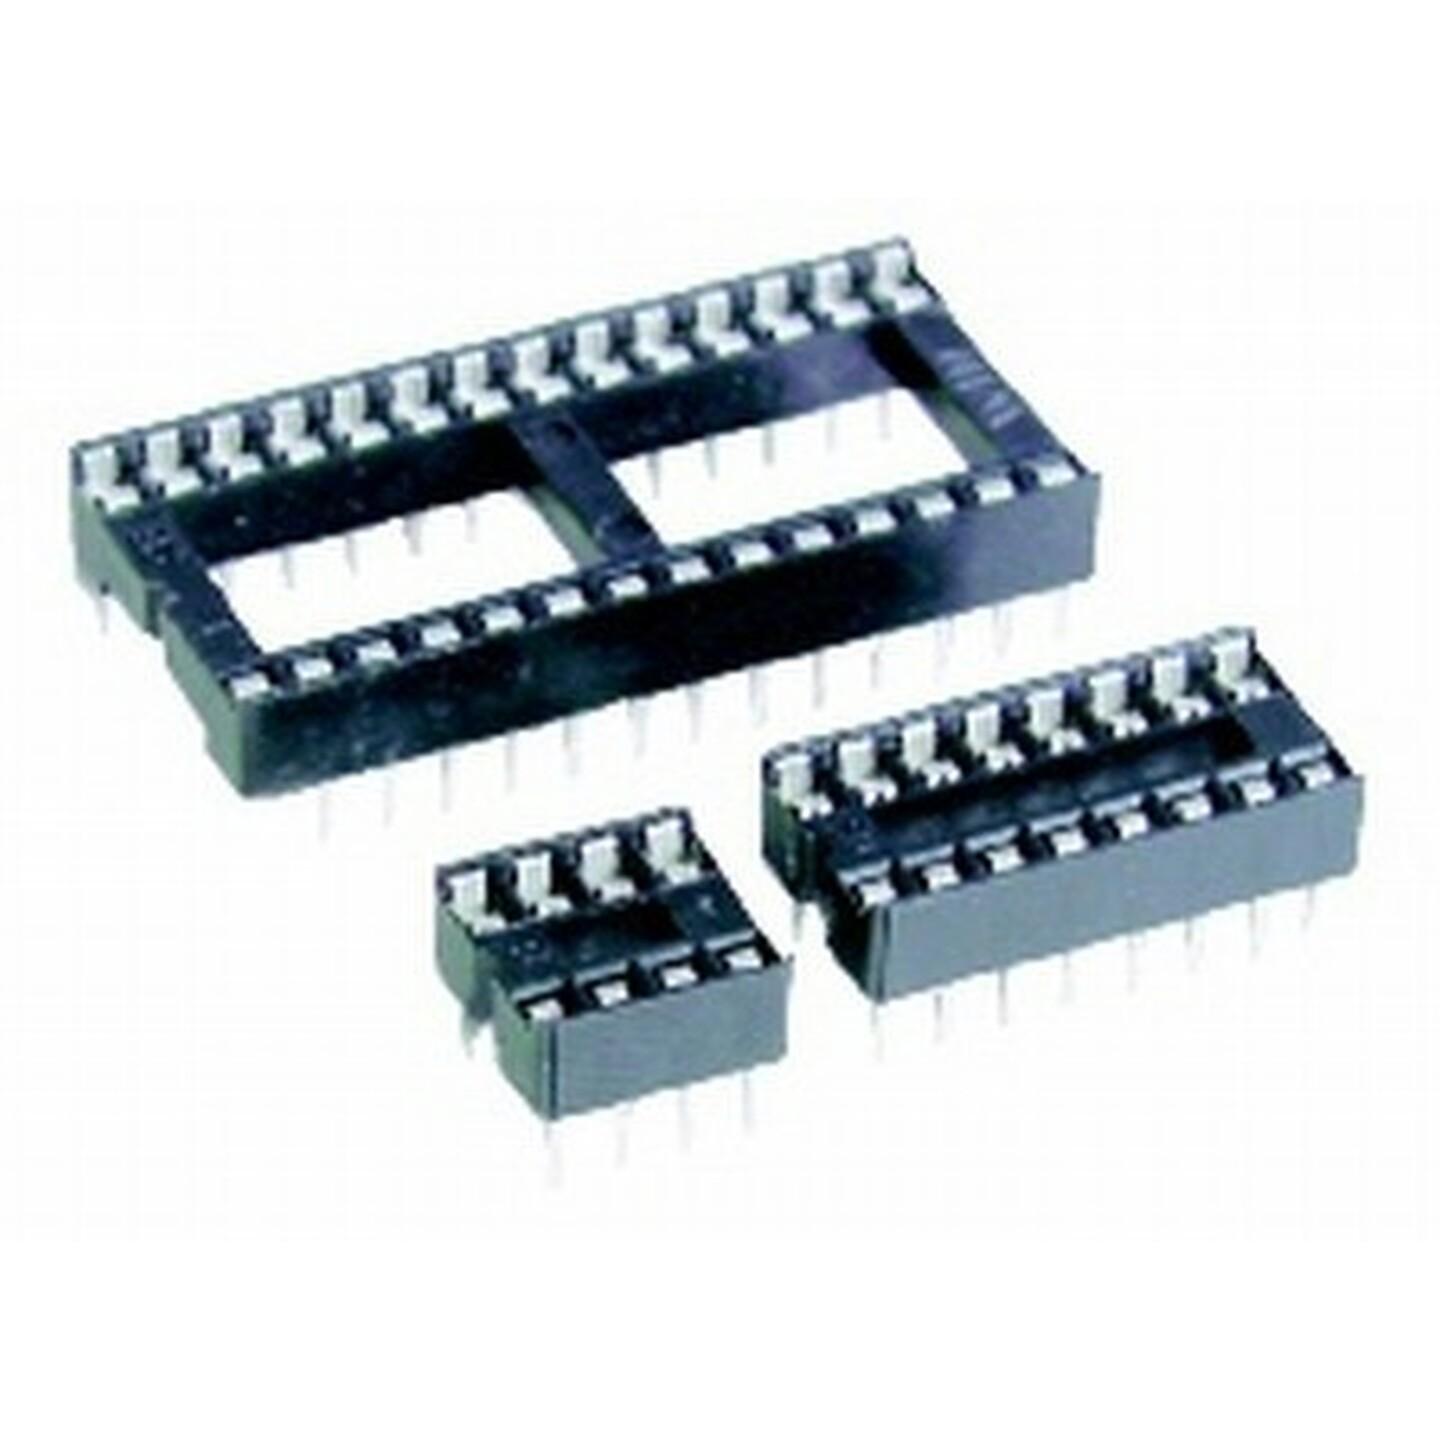 28 Pin Production Low Cost IC Socket